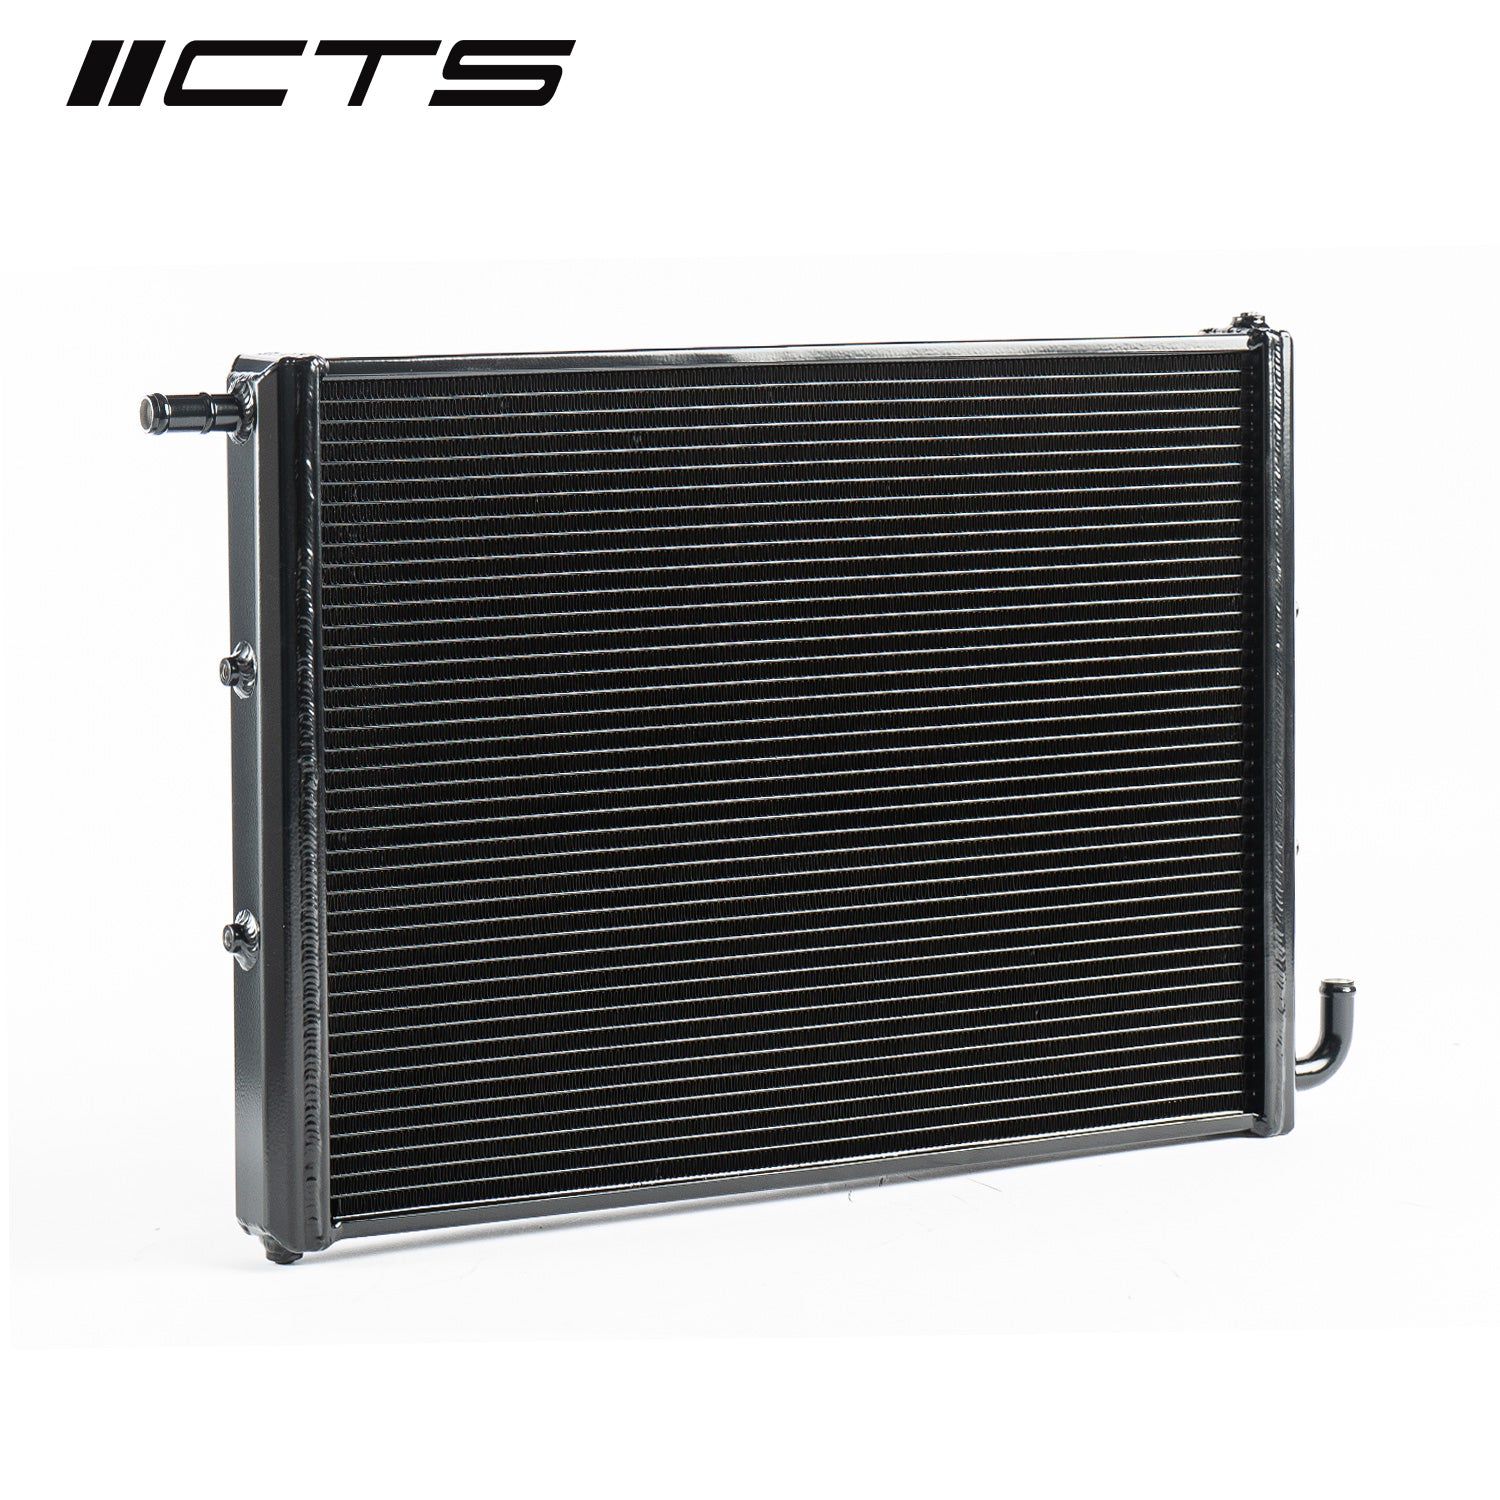 CTS B8/B8.5 AUDI S4/S5/Q5/SQ5 3.0T SUPERCHARGED HEAT EXCHANGER UPGRADE